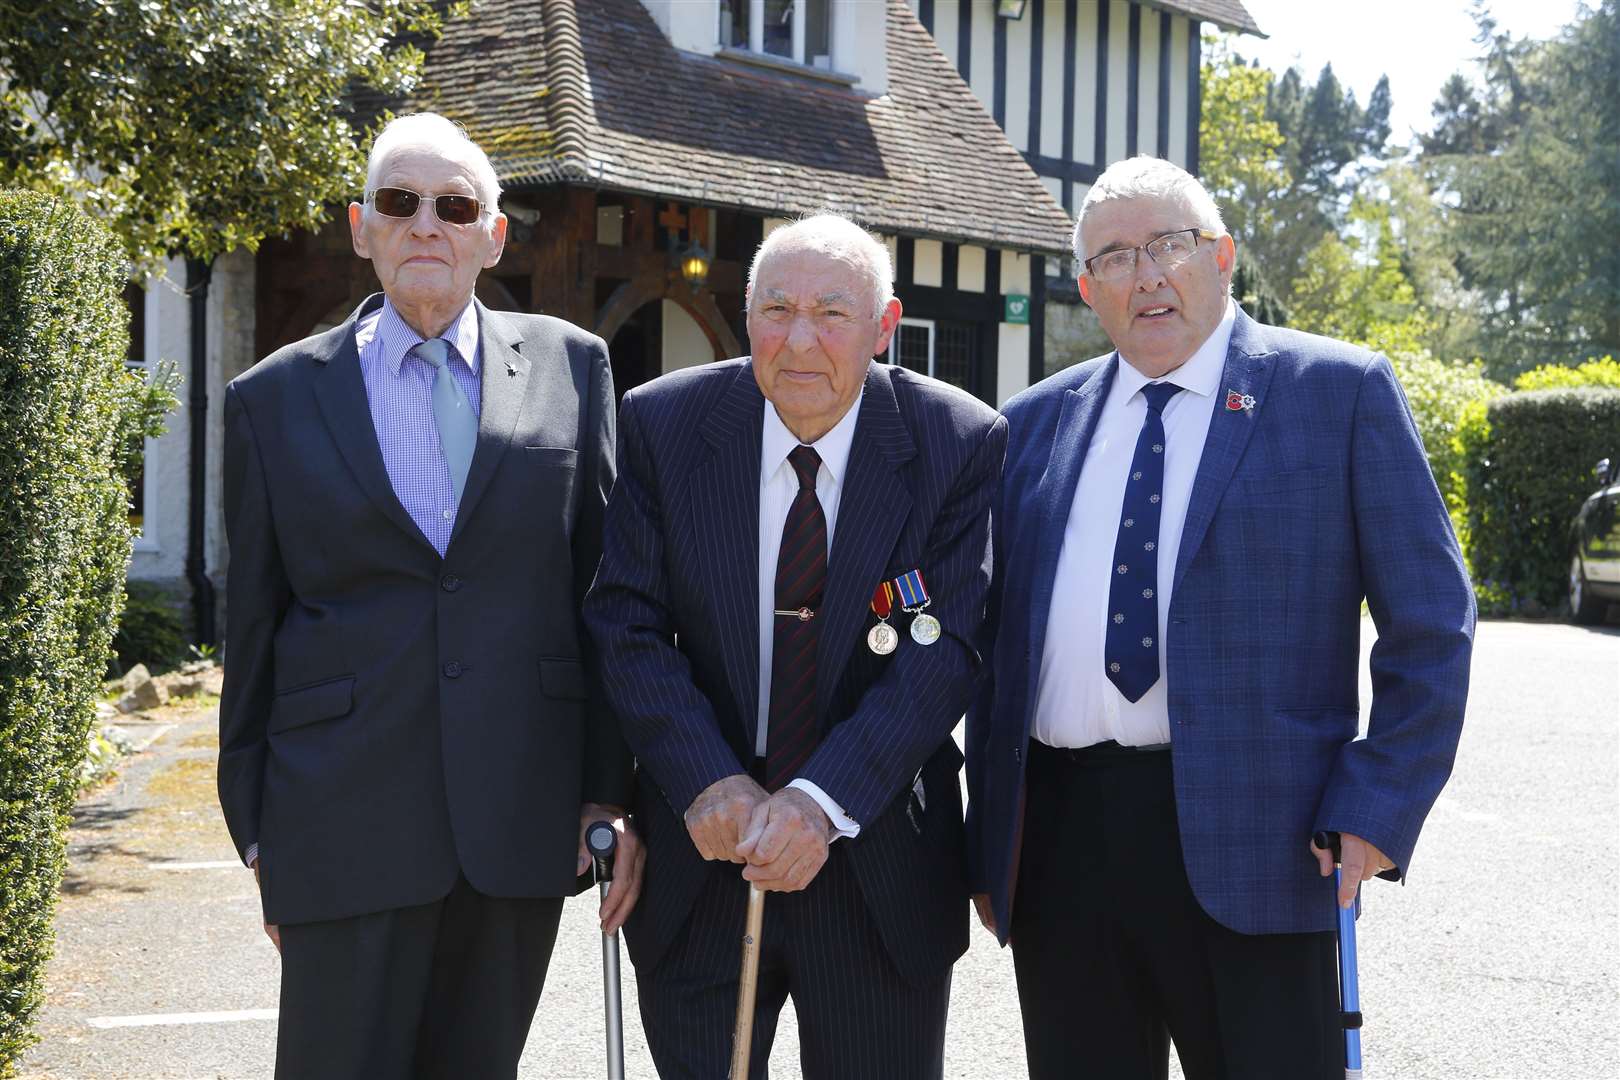 Retired firefighters: Peter Whent, Don Bates and Tony Bush